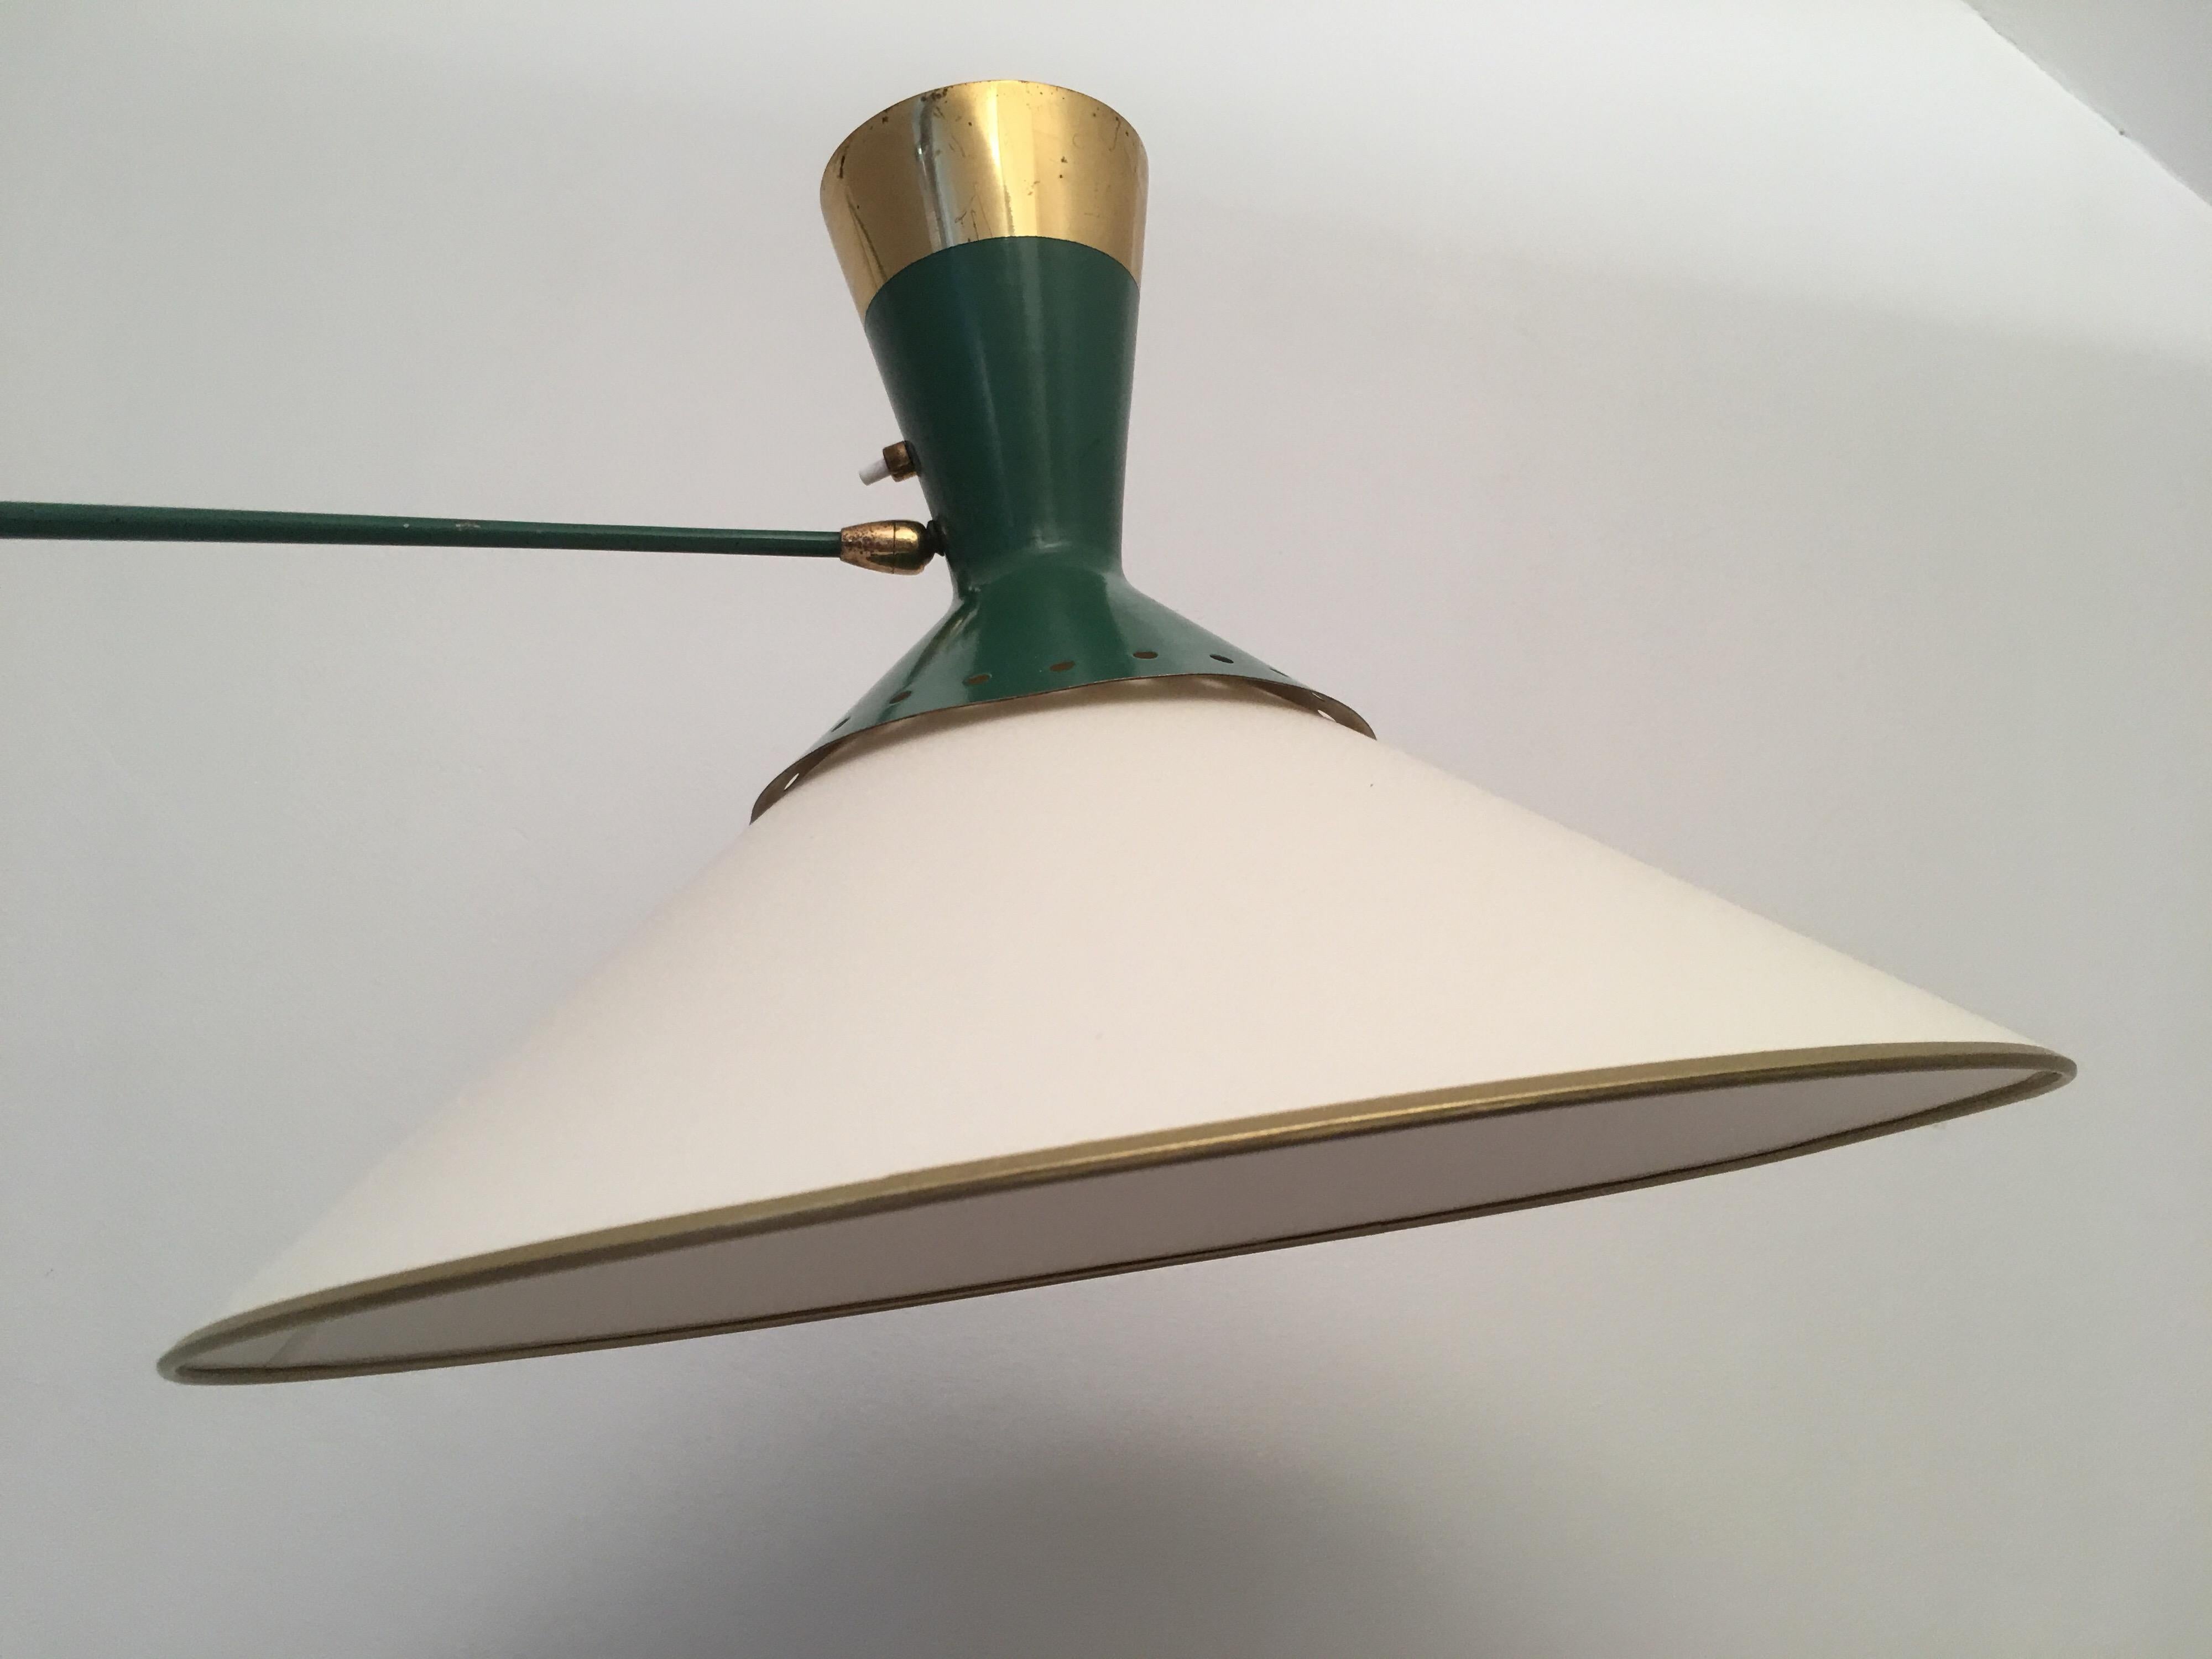 Arlus Green and Gilt Counter Balance Swing Arm Wall Lamp, French 1950s For Sale 4